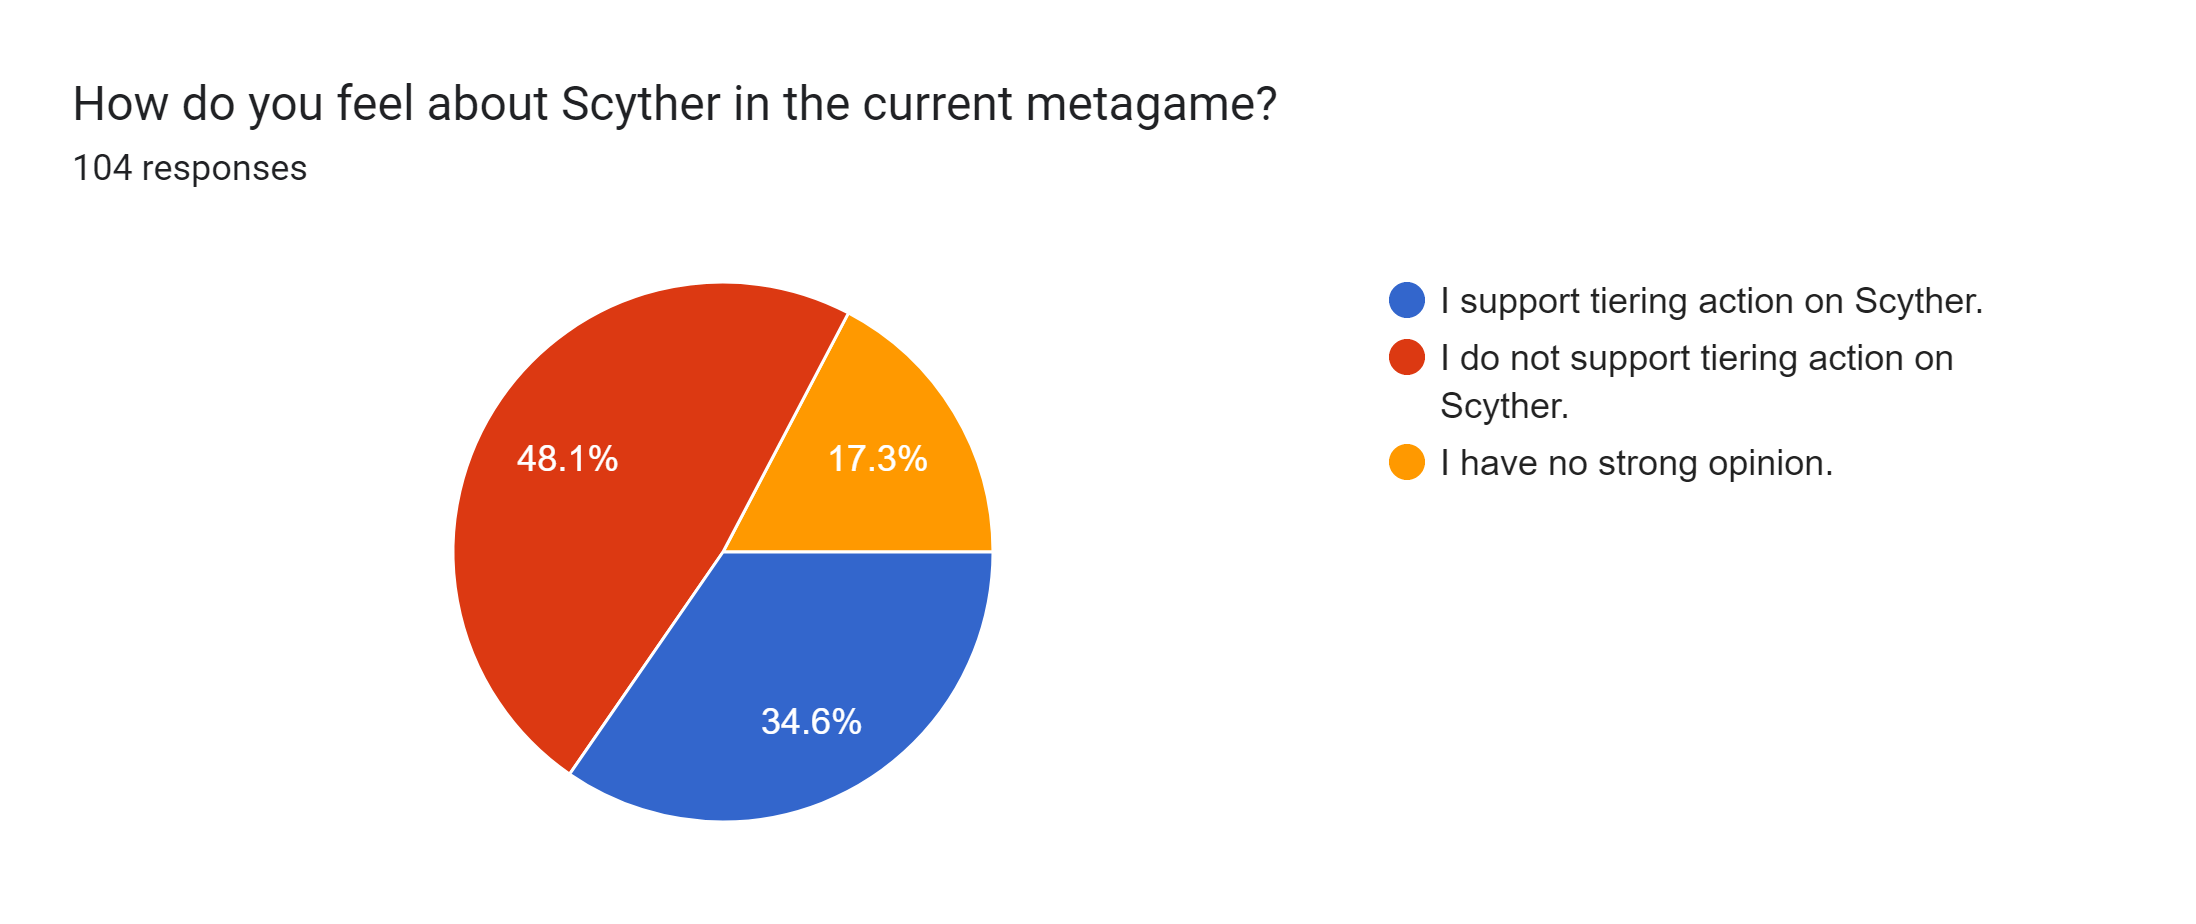 Forms response chart. Question title: How do you feel about Scyther in the current metagame?. Number of responses: 104 responses.